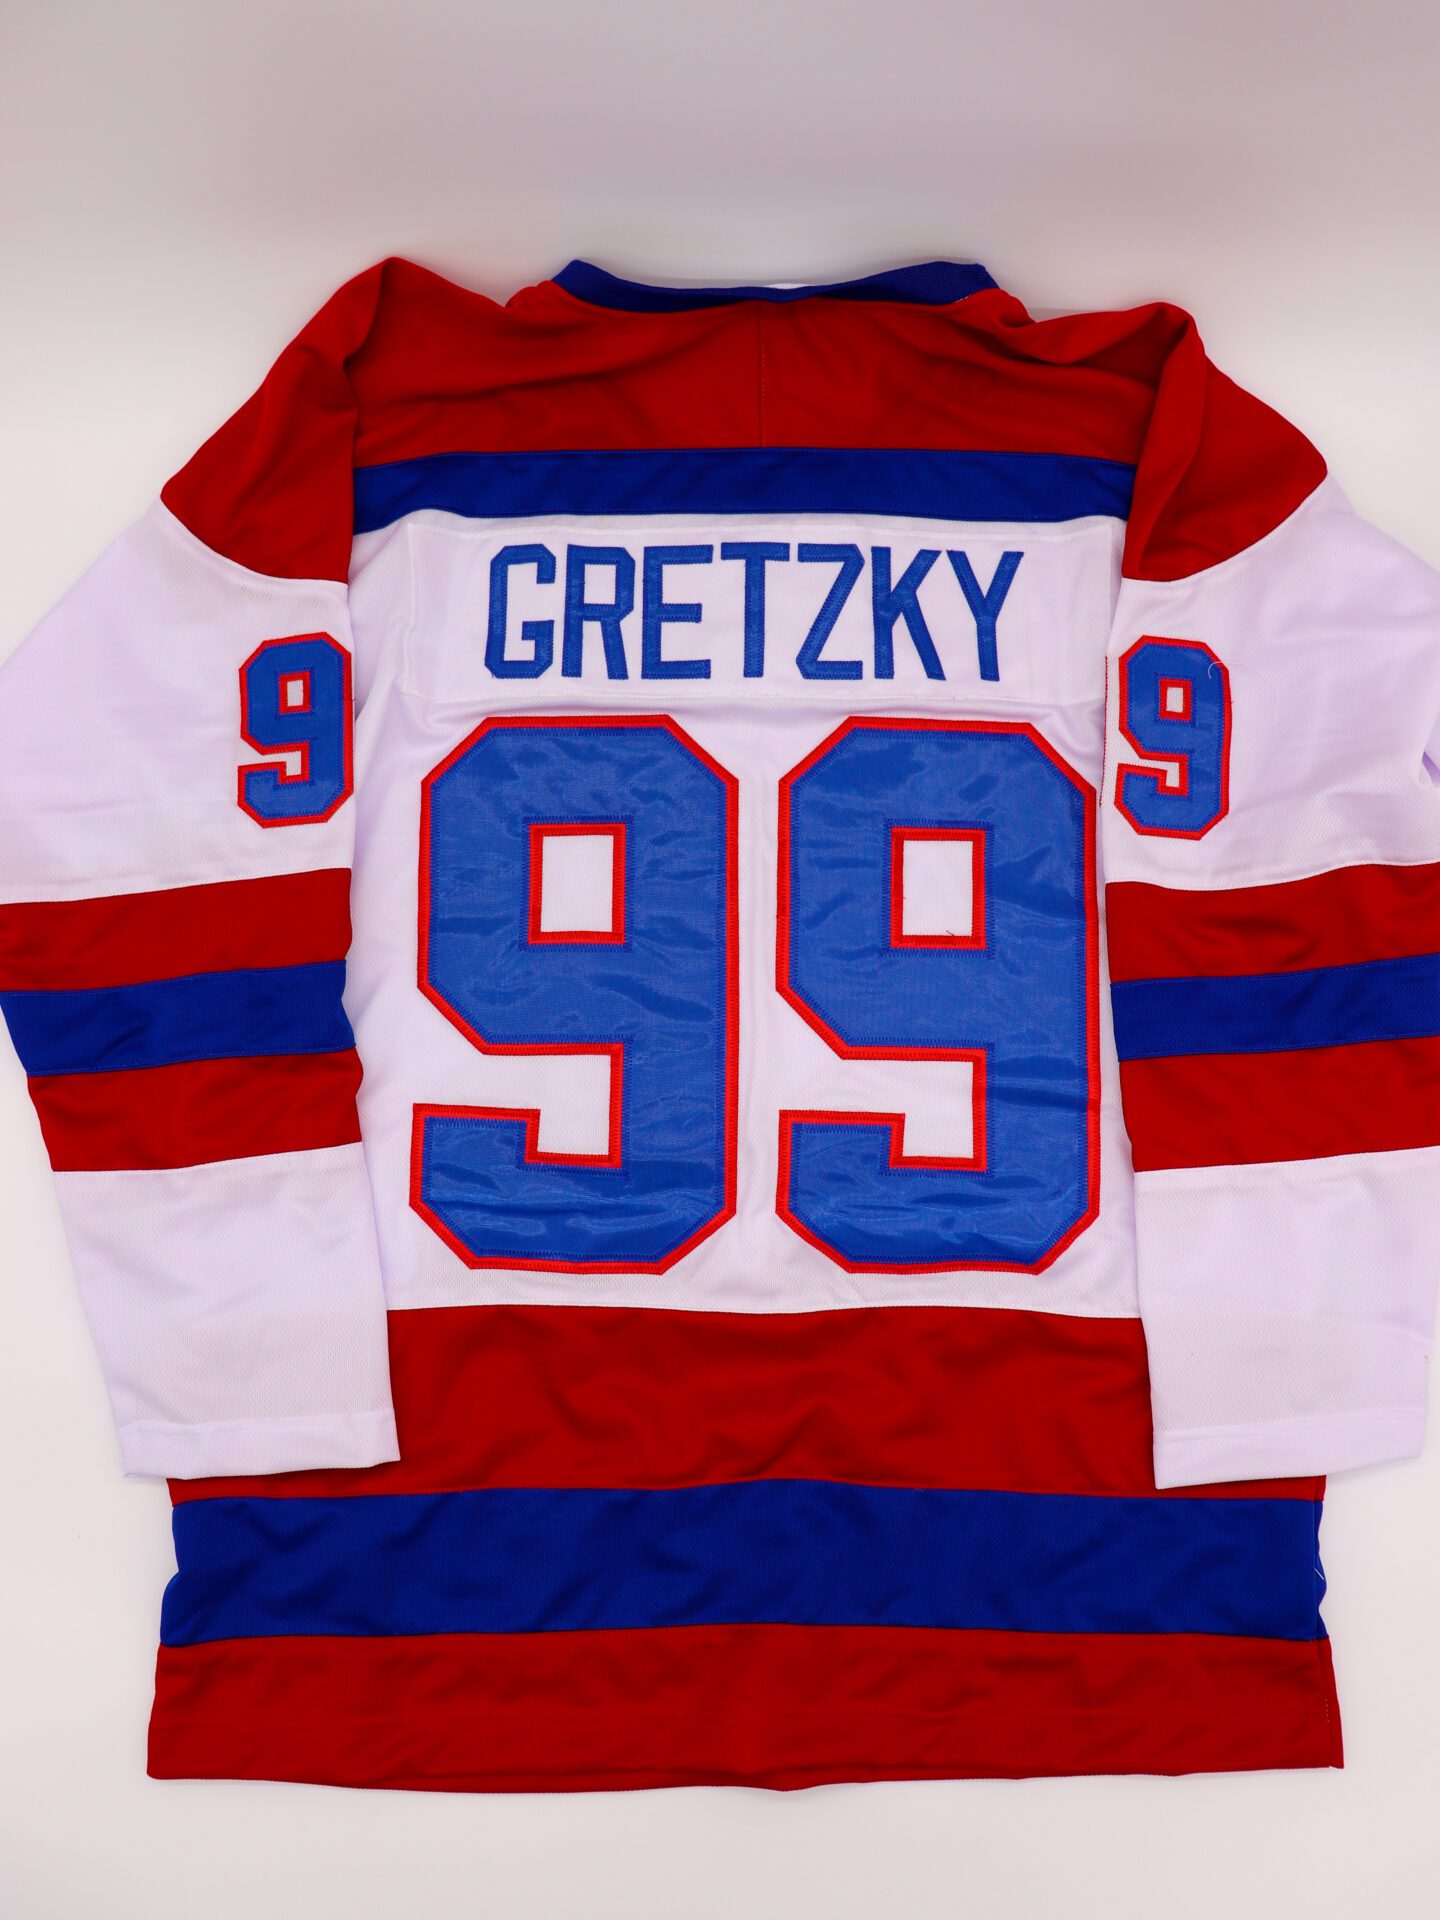 1978 #99 Wayne Gretzky Indianapolis Racers Home White WHA Jersey, Size XXL, New without Tags